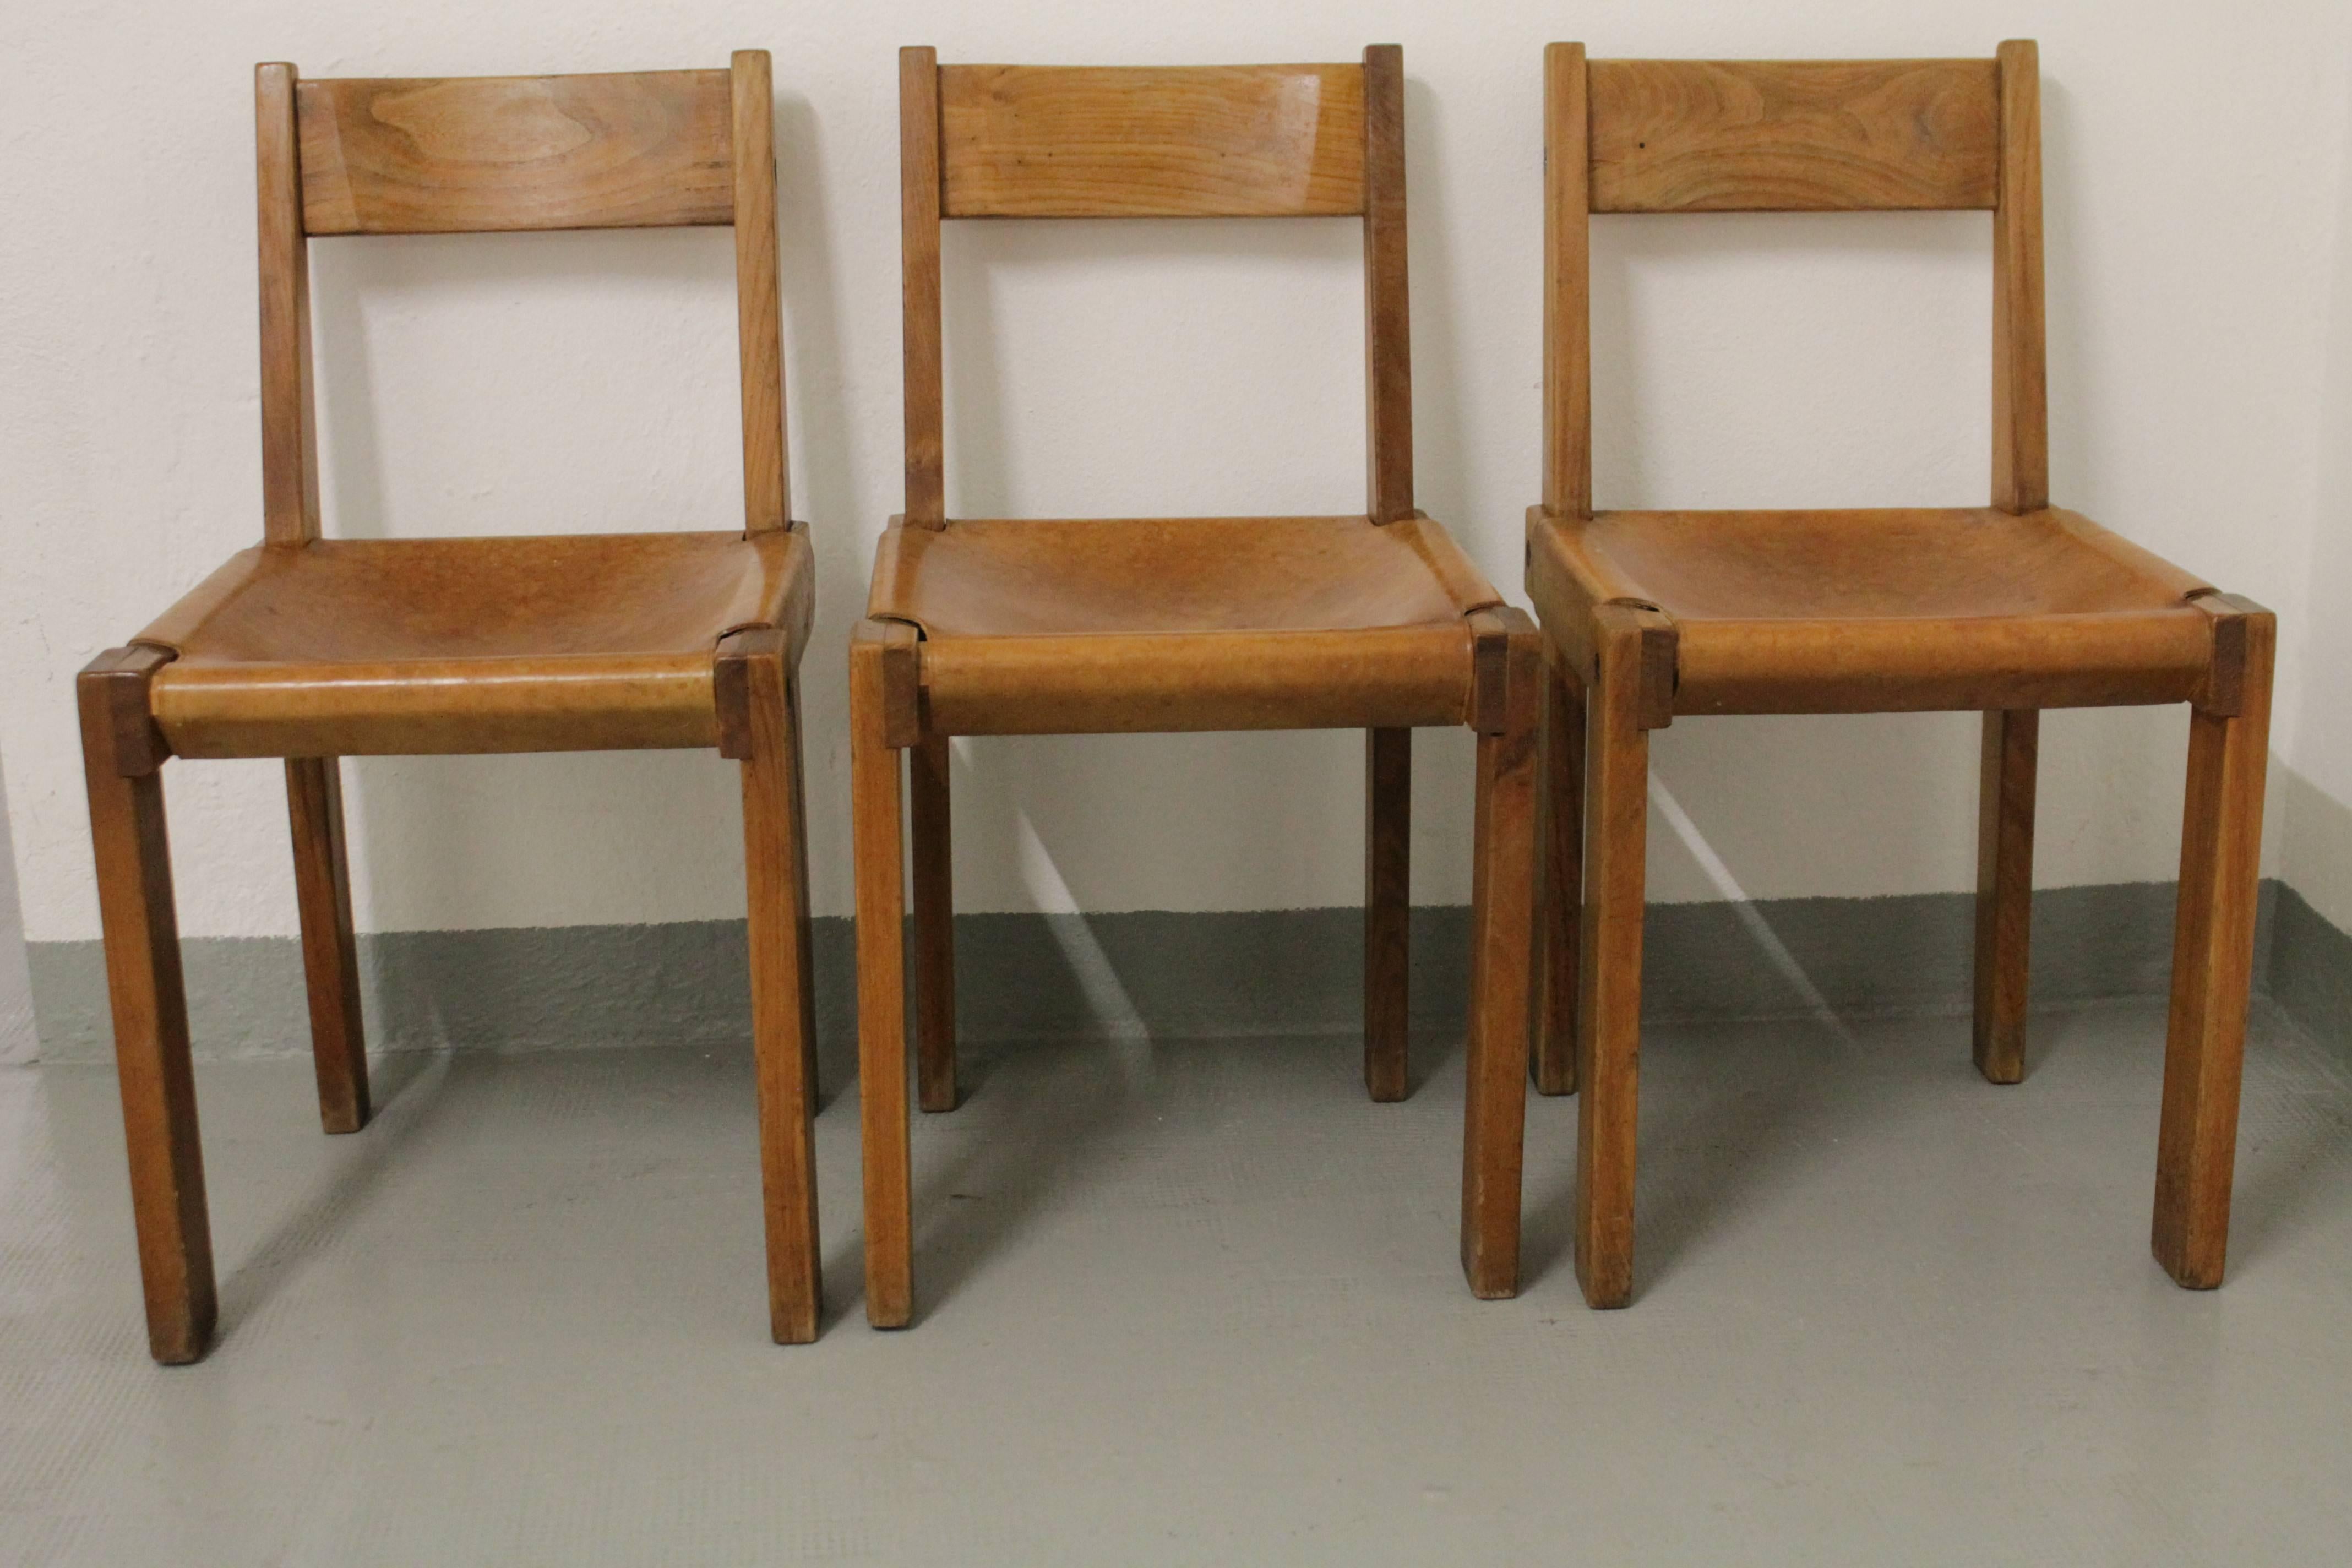 Set of three S24 solid elm and cognac leather dining chairs by Pierre Chapo, France, circa 1960s
Beautiful patina, some traces on leather.